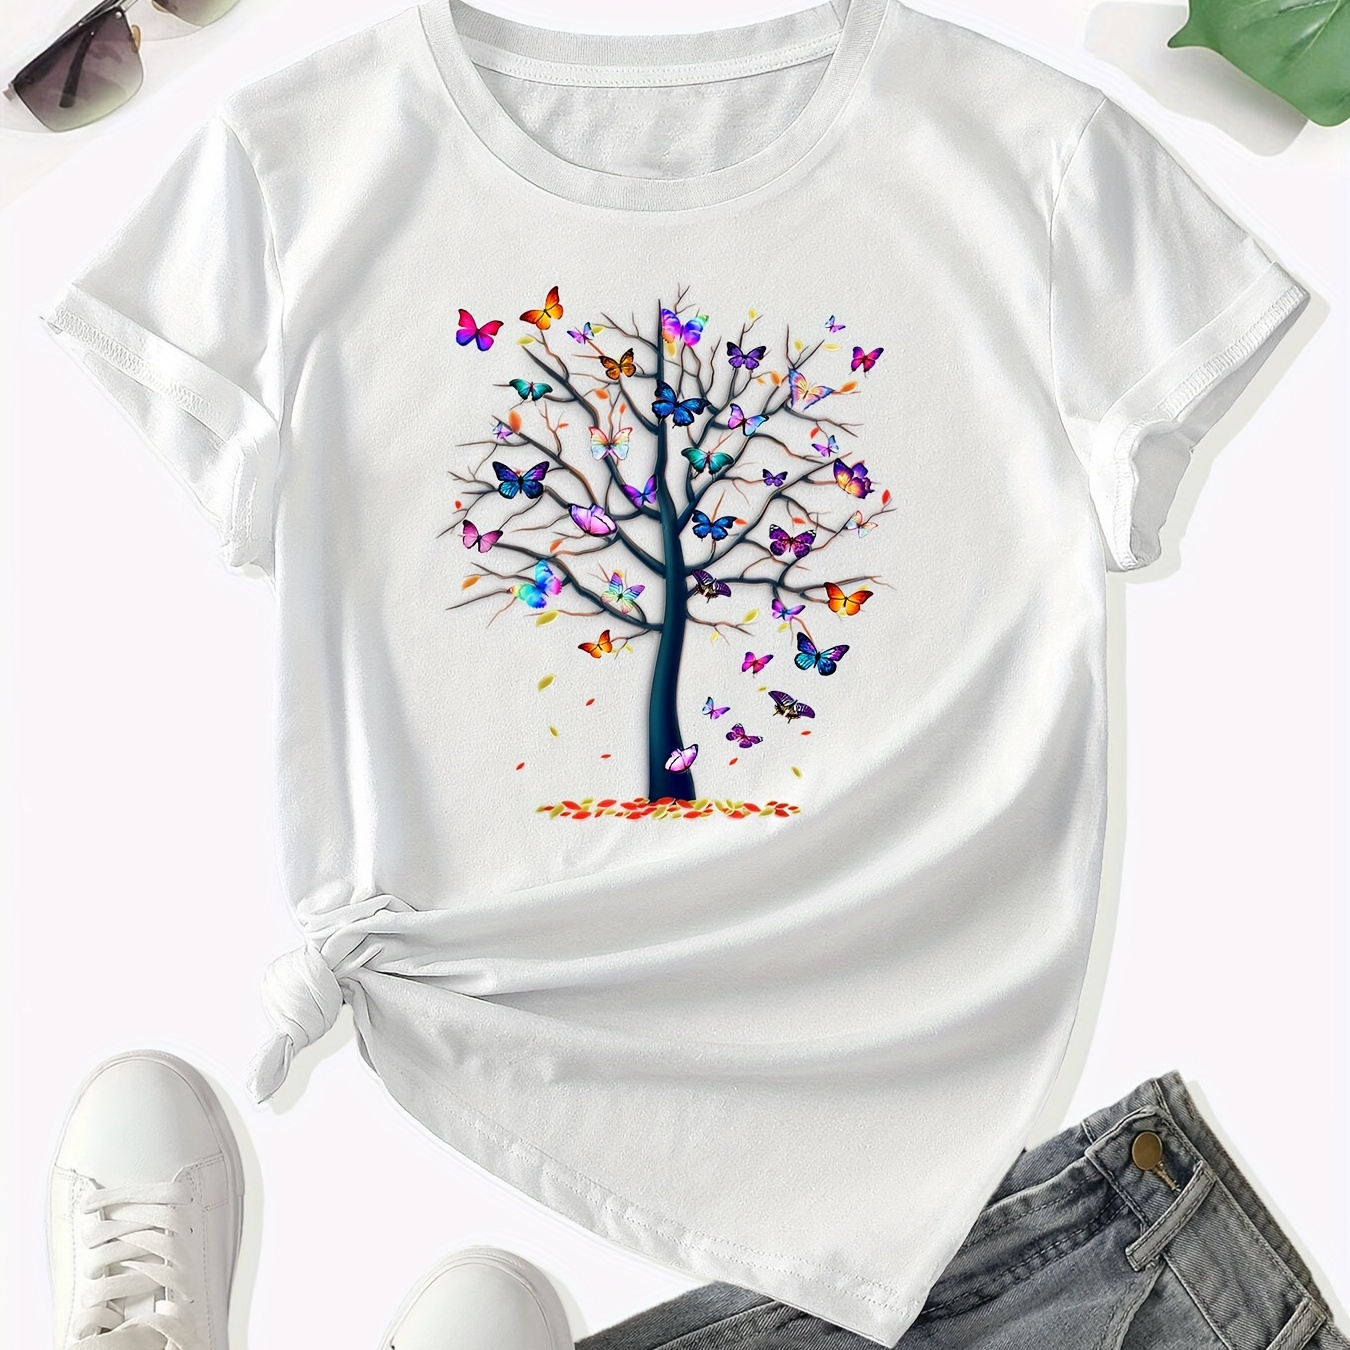 

Butterfly Tree Print Crew Neck T-shirt, Casual Short Sleeve T-shirt For Spring & Summer, Women's Clothing